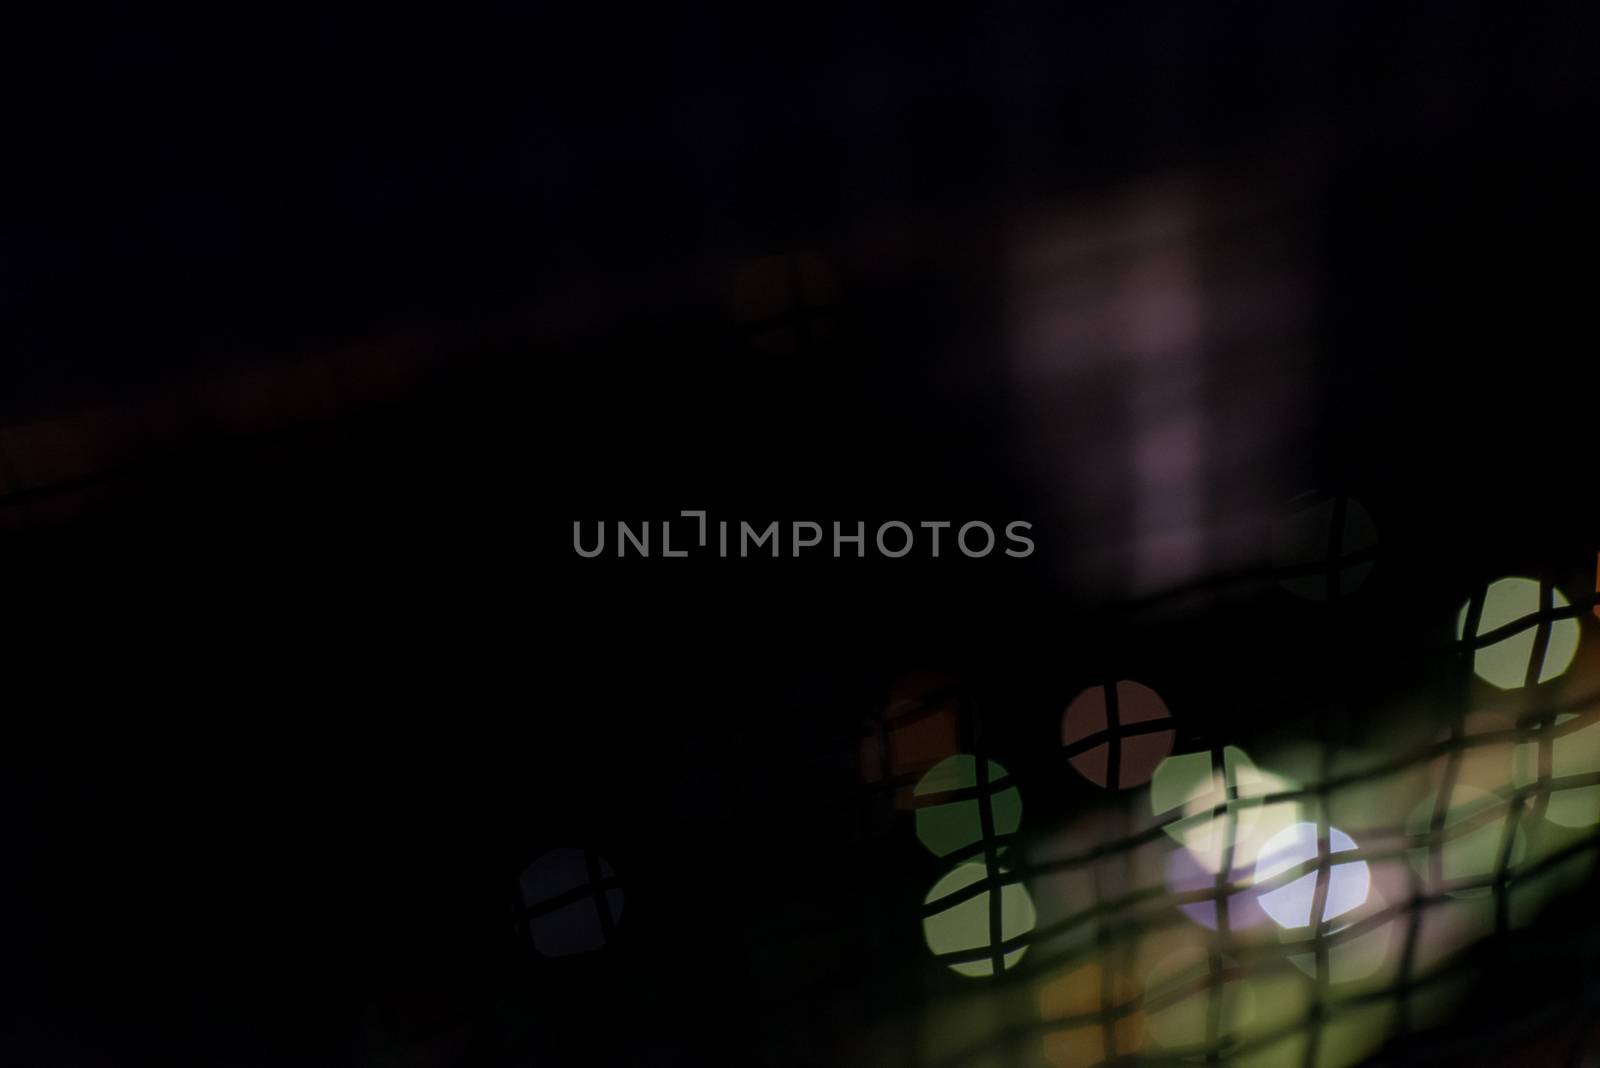 A dark abstract with colored balls of bokeh (out of focus light points) and a wavy wiring in front of them.